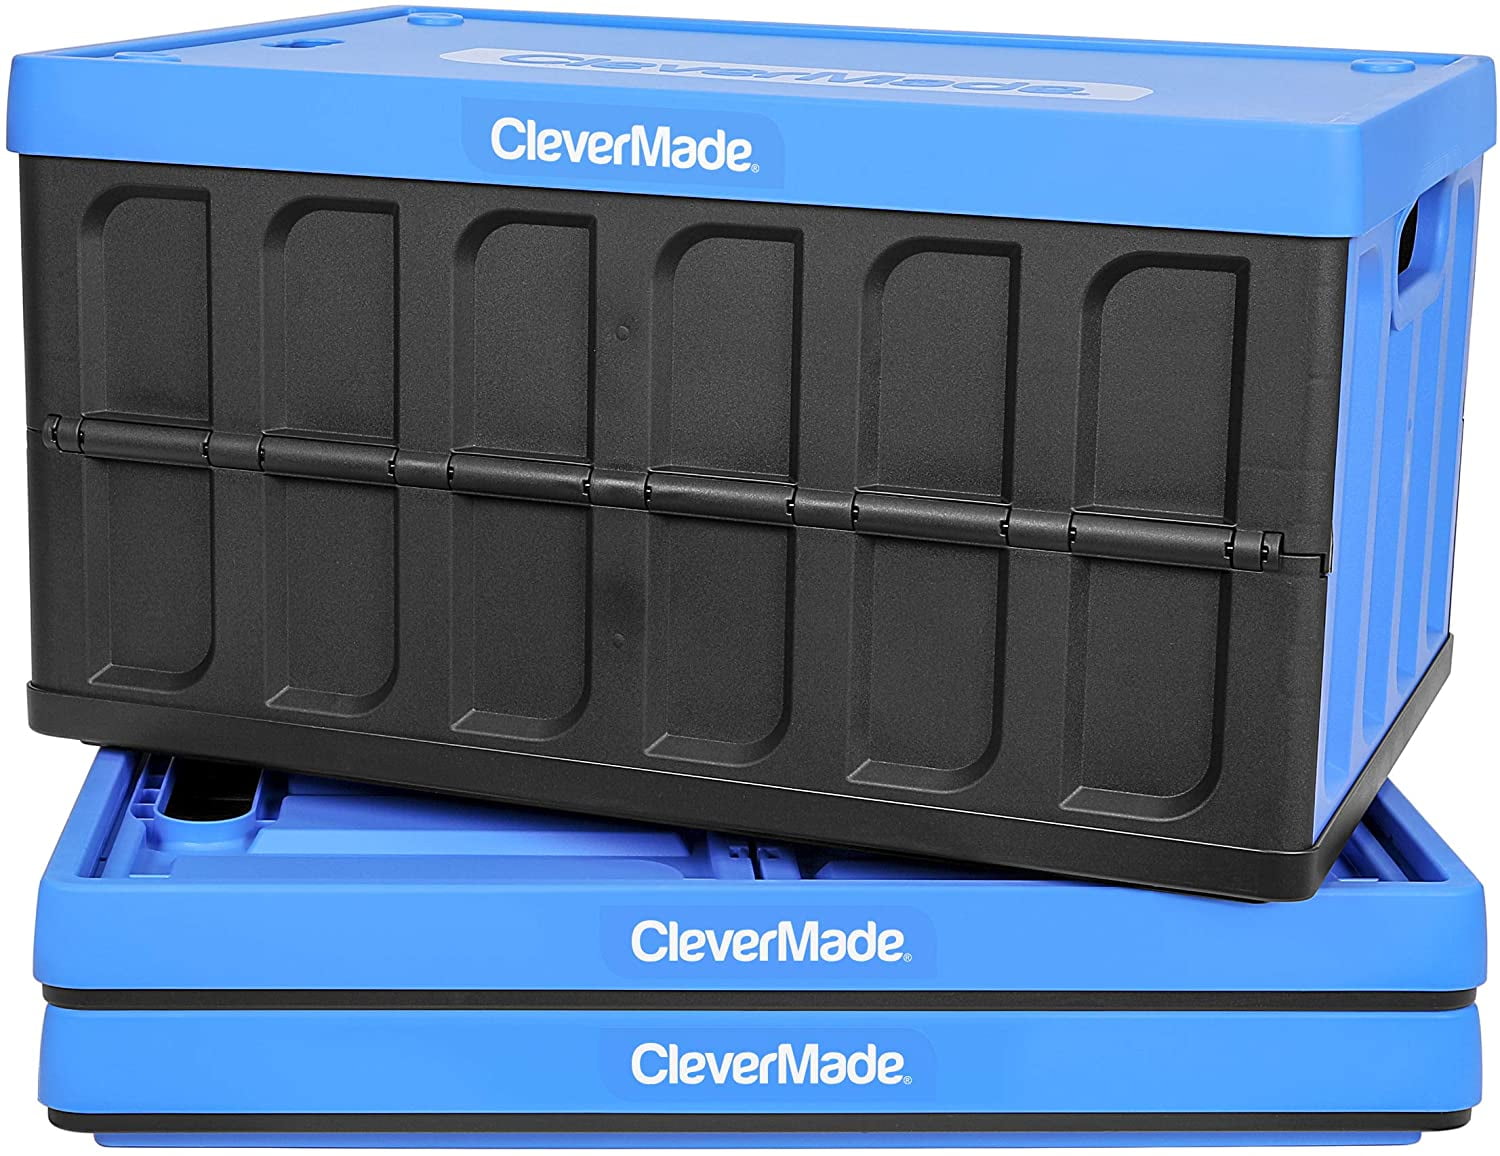 Solid Wall 3 Pack Neptune Blue CleverMade 46L Collapsible Storage Bins with Lids Folding Plastic Stackable Utility Crates